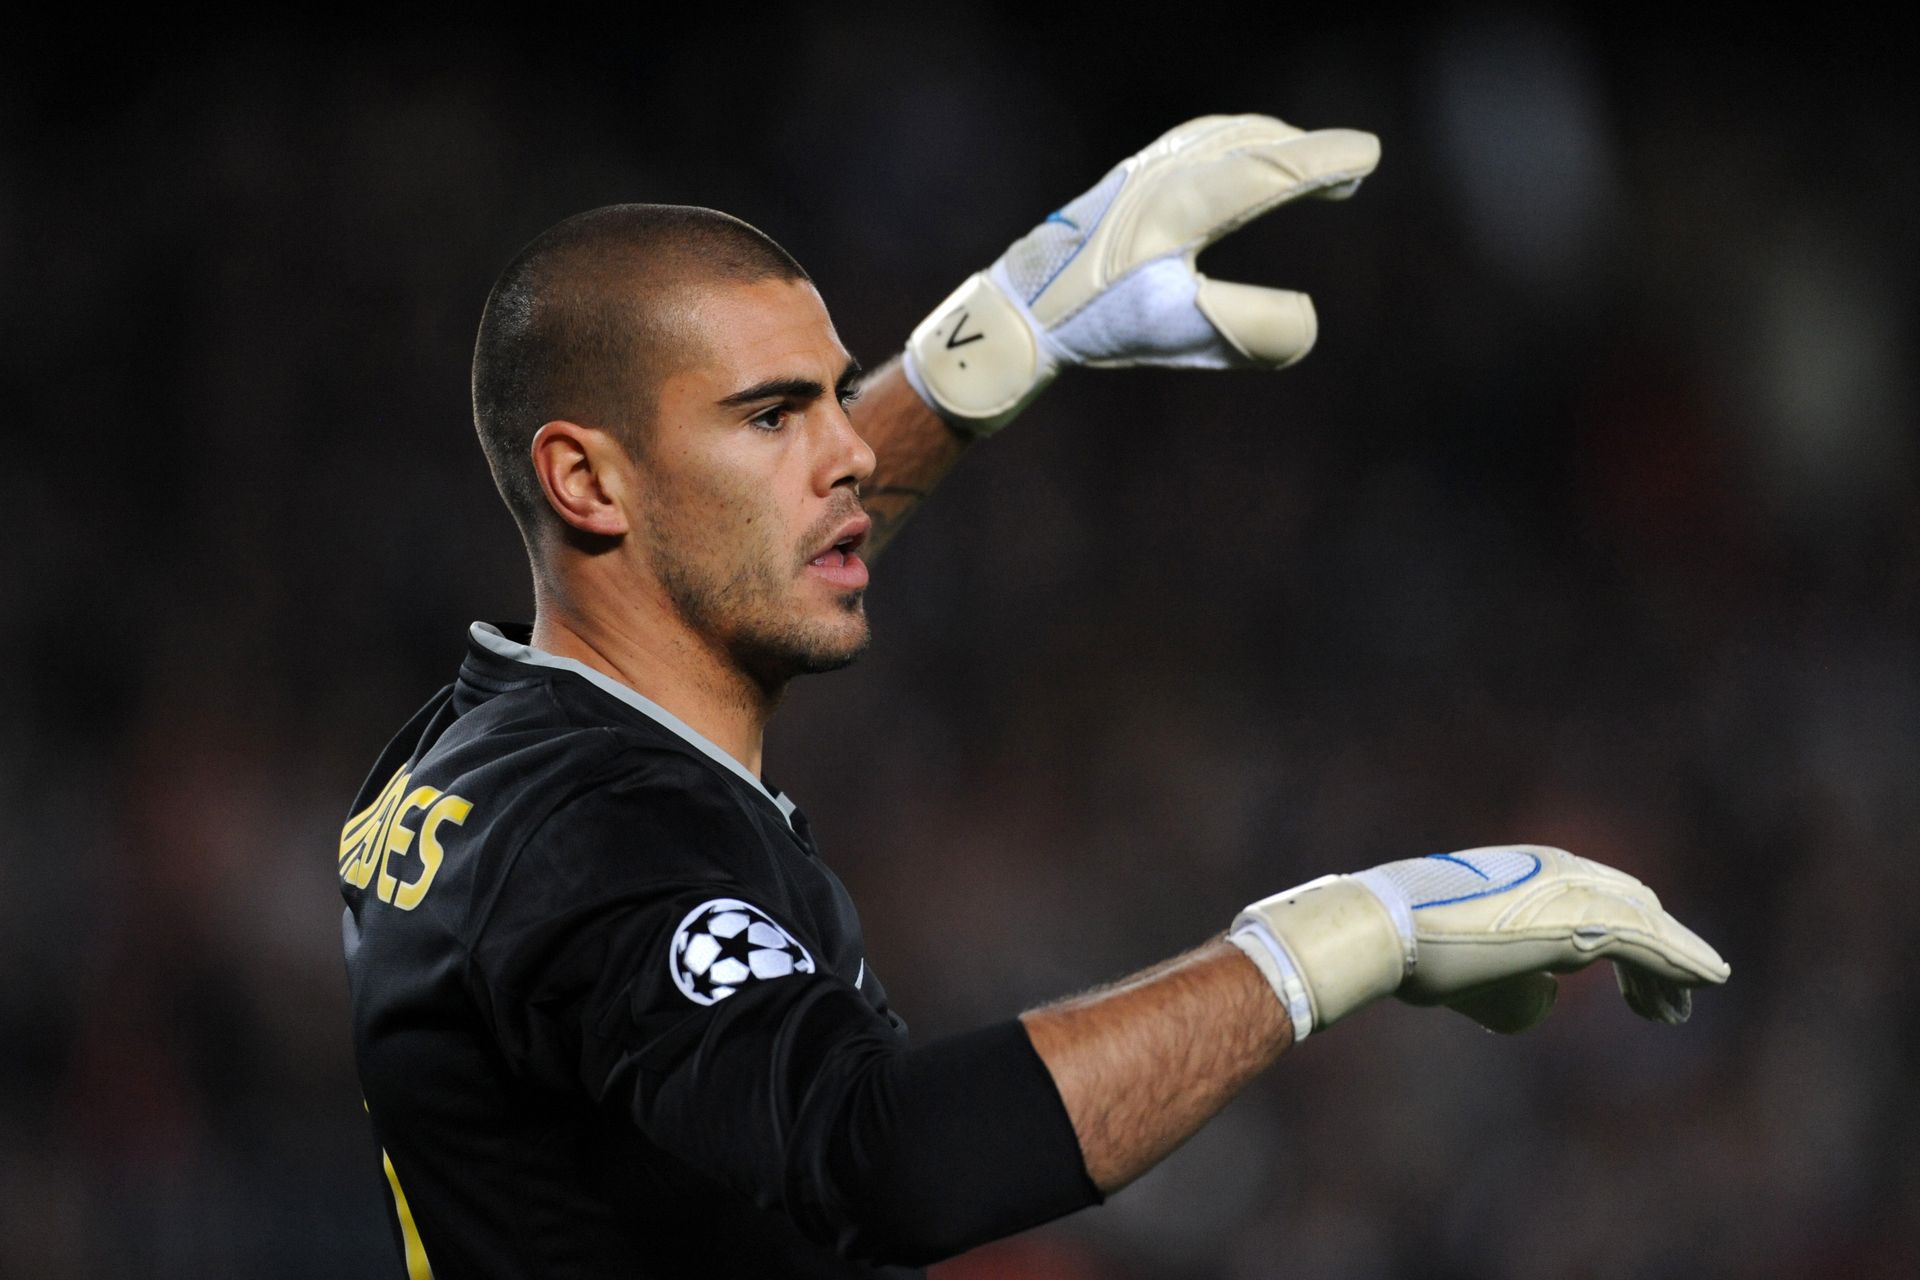 <p>                     Victor Valdes did not play for Spain until 2010 and was only a back-up option when he did, but he was one of the best goalkeepers in the world throughout the 2000s.                   </p>                                      <p>                     Valdes made a number of key saves as Barcelona beat Arsenal in Paris to win the Champions League in 2006. Strong with his feet as well as making saves, he was important in initiating attacks under Pep Guardiola as the goalkeeper in possibly the greatest club side of all time, winning the treble in 2008/09.                   </p>